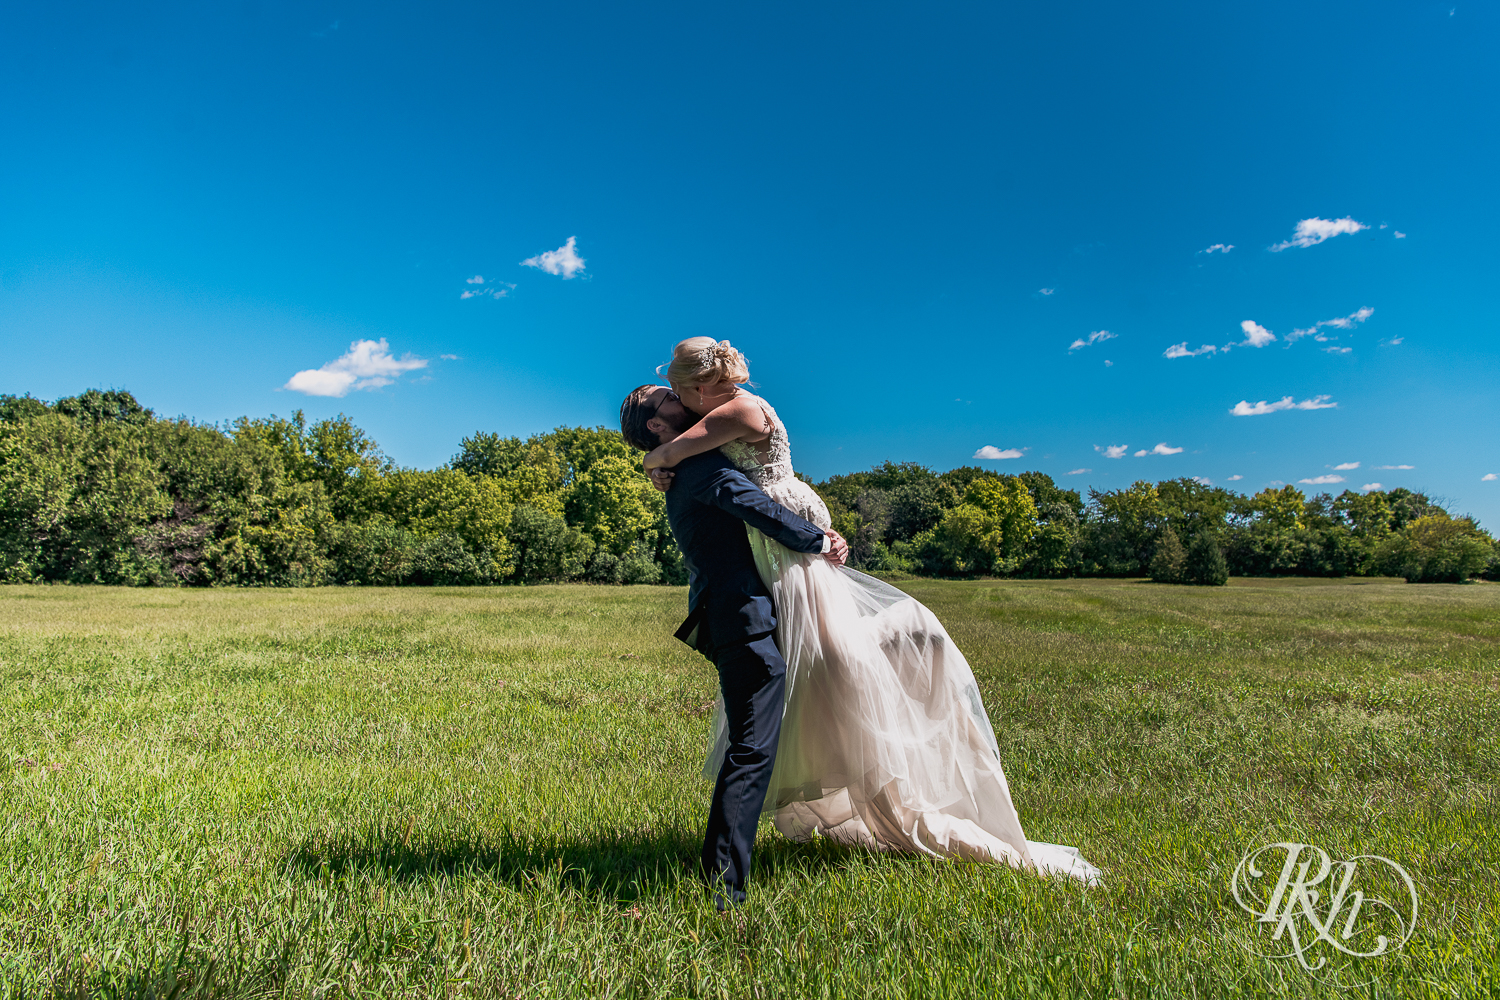 Groom lifts and kisses bride in sunny field at Green Acres Event Center in Eden Prairie, Minnesota.